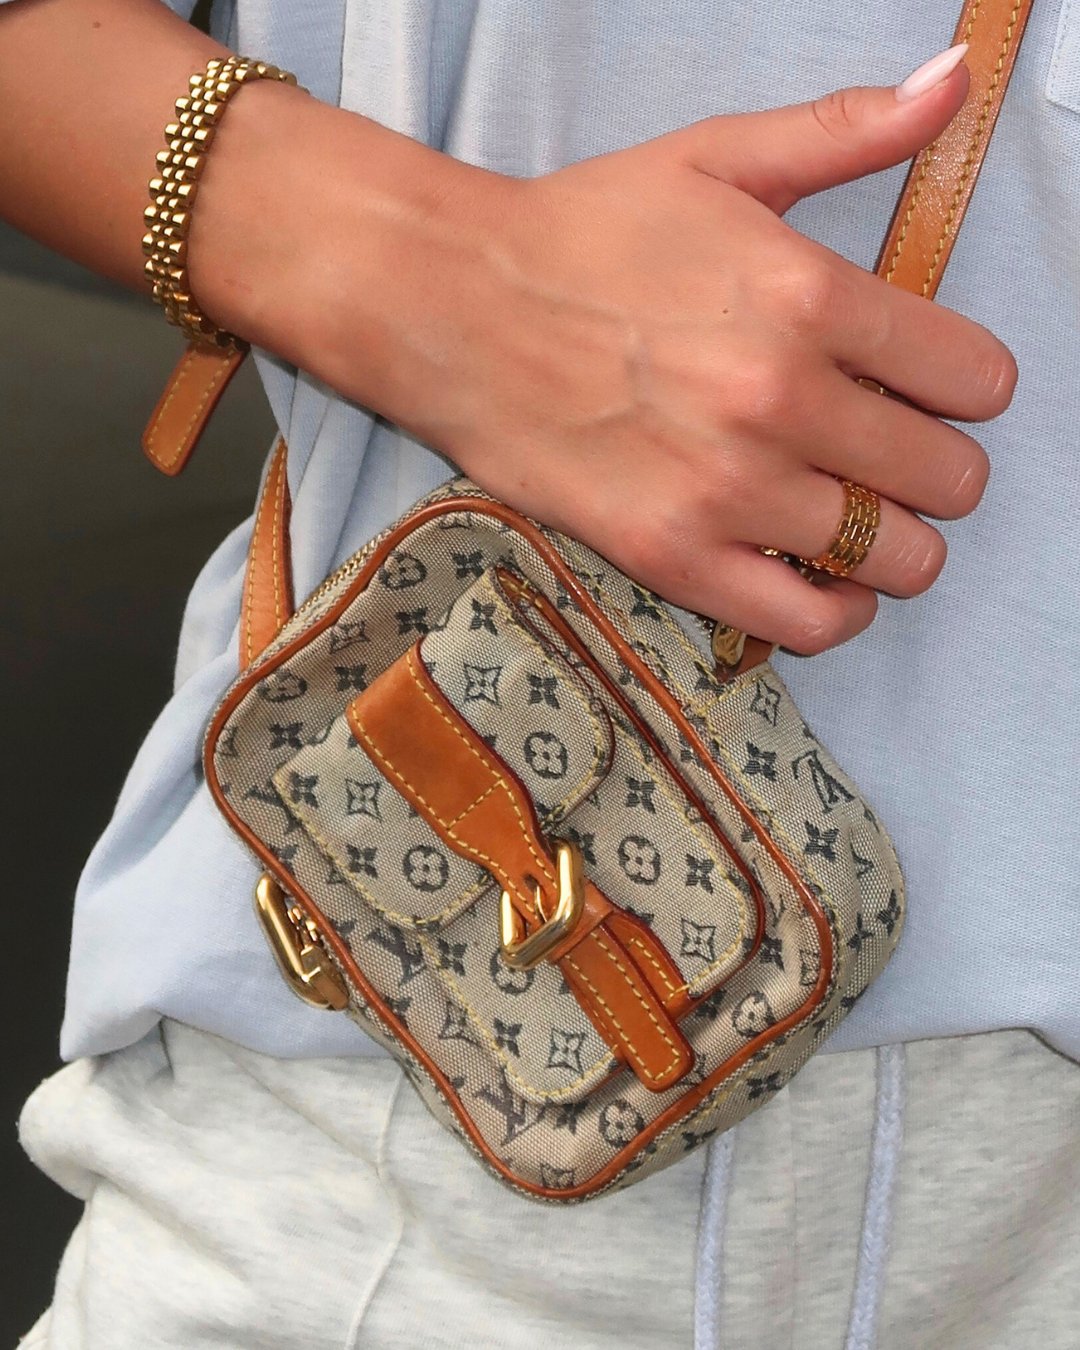 ANOTHER LV PRICE INCREASE 😱  IS THE POCHETTE METIS STILL WORTH IT? 